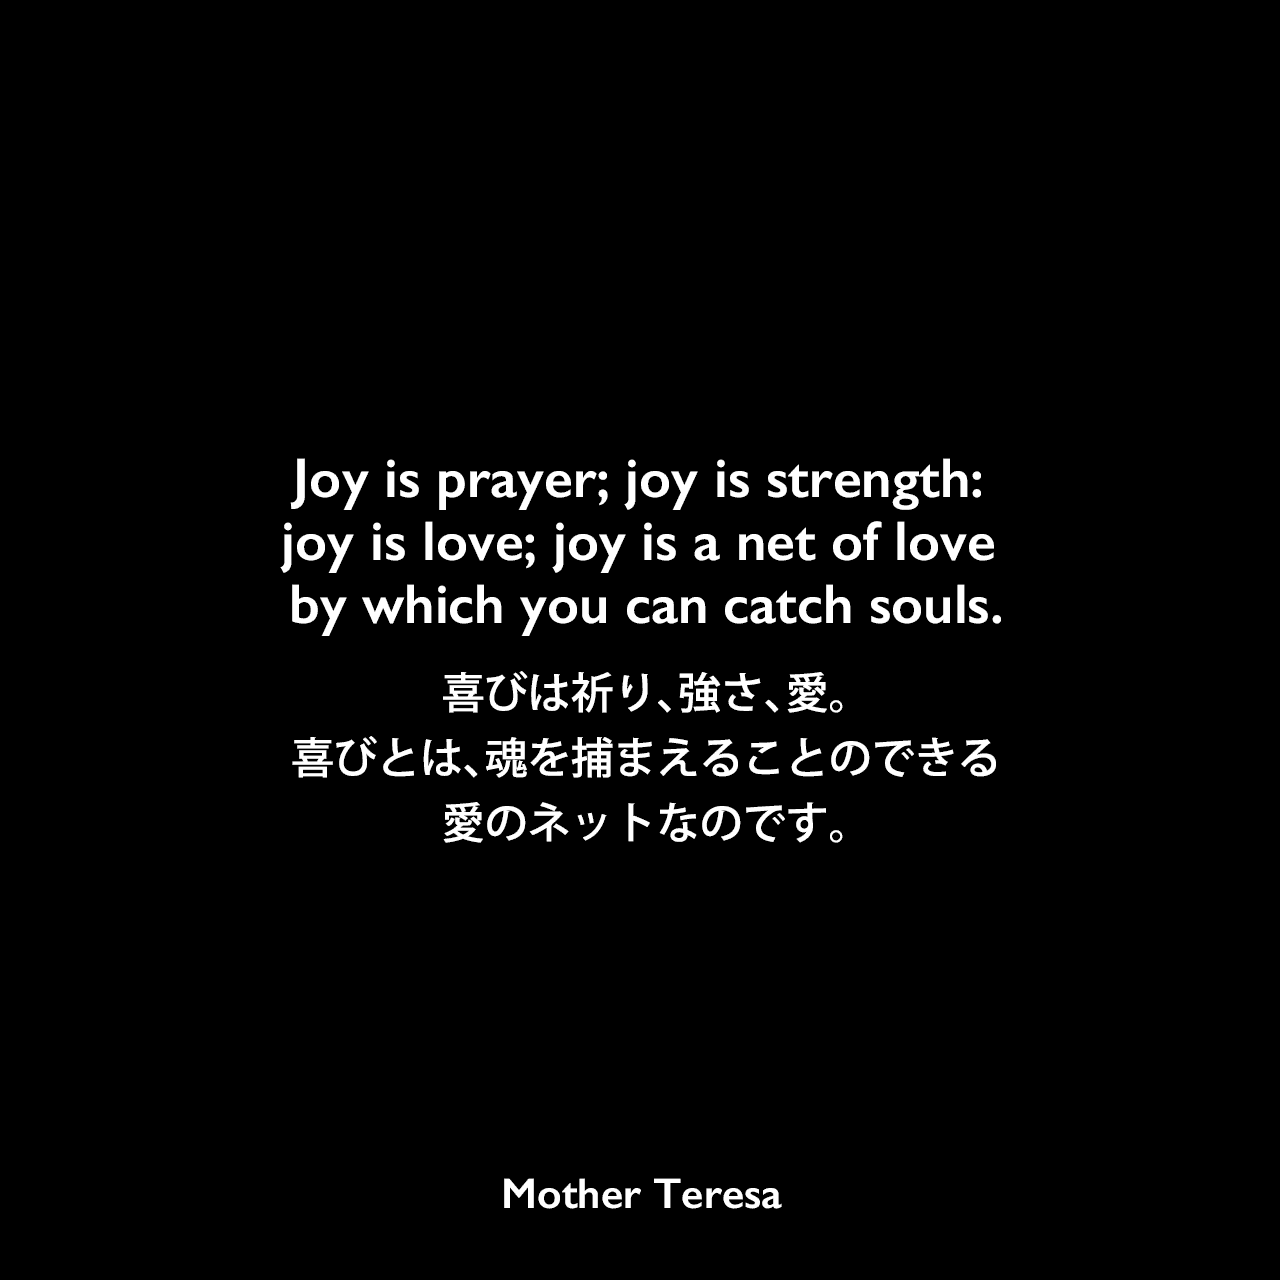 Joy is prayer; joy is strength: joy is love; joy is a net of love by which you can catch souls.喜びは祈り、強さ、愛。喜びとは、魂を捕まえることのできる愛のネットなのです。Mother Teresa